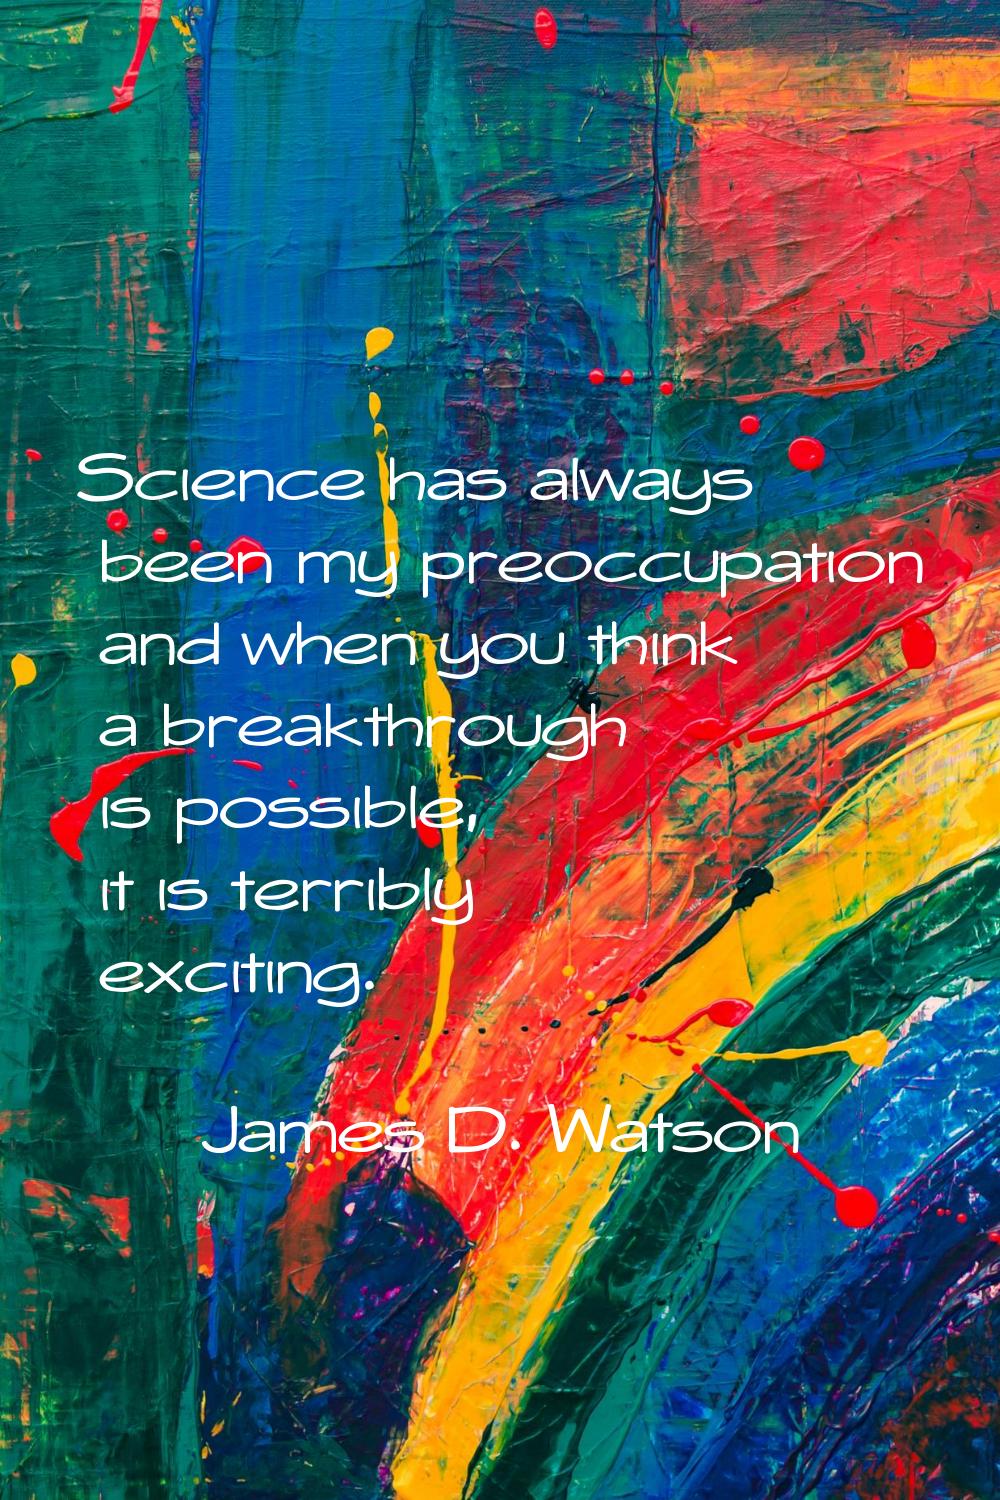 Science has always been my preoccupation and when you think a breakthrough is possible, it is terri